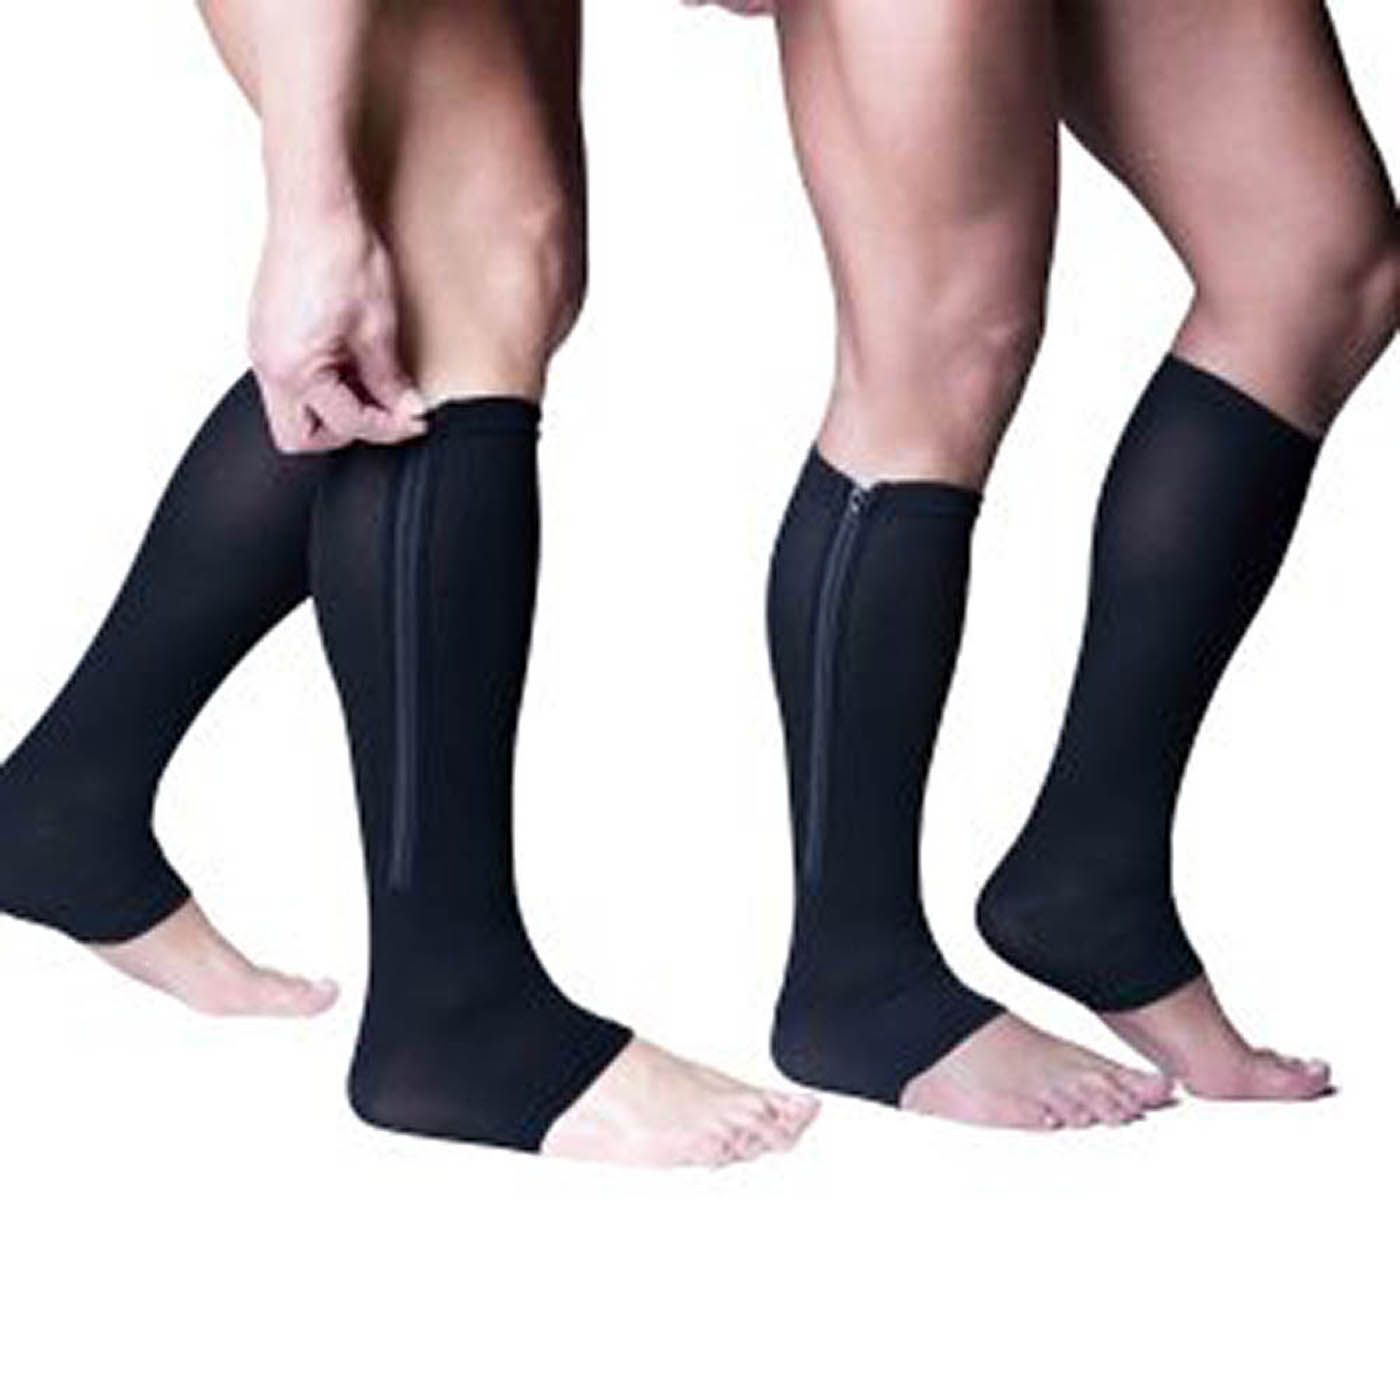 VITAL SOCKS Double economic offer (2 pairs + 2 gift) – compression